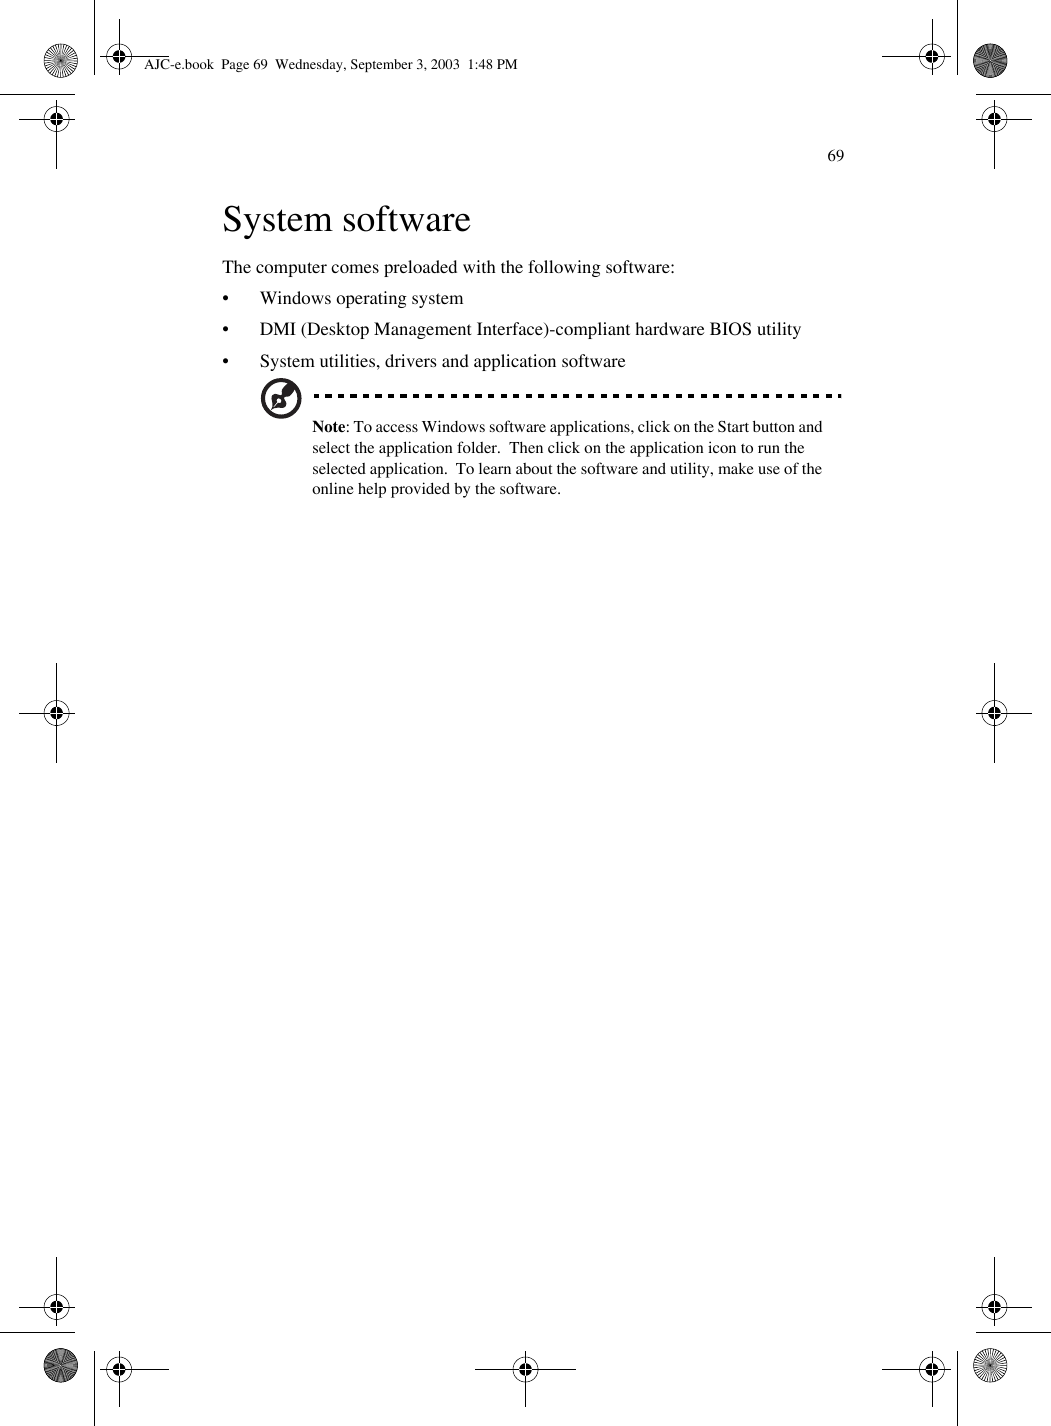 69System softwareThe computer comes preloaded with the following software:• Windows operating system• DMI (Desktop Management Interface)-compliant hardware BIOS utility• System utilities, drivers and application softwareNote: To access Windows software applications, click on the Start button and select the application folder.  Then click on the application icon to run the selected application.  To learn about the software and utility, make use of the online help provided by the software.AJC-e.book  Page 69  Wednesday, September 3, 2003  1:48 PM